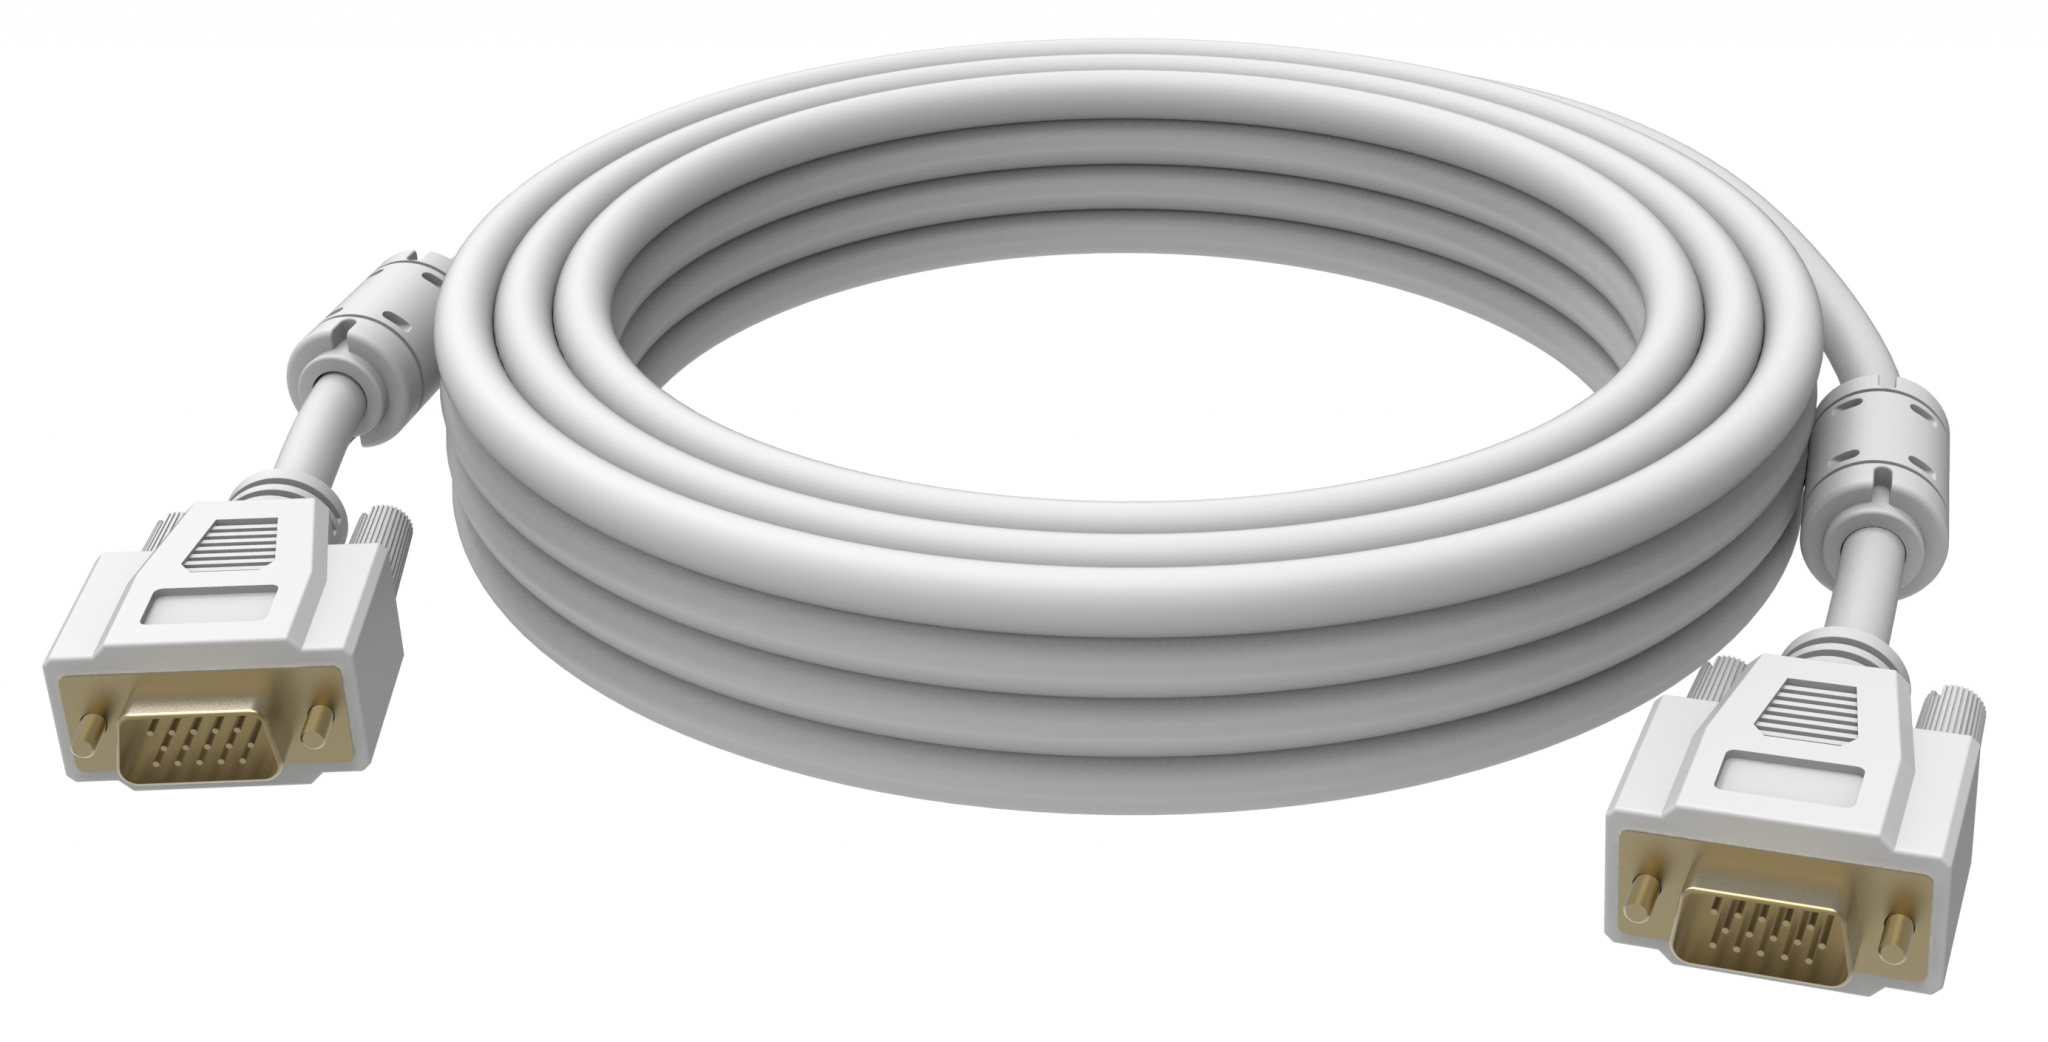 An image showing Cable profesional blanco tipo VGA de 3 m (10 pies)